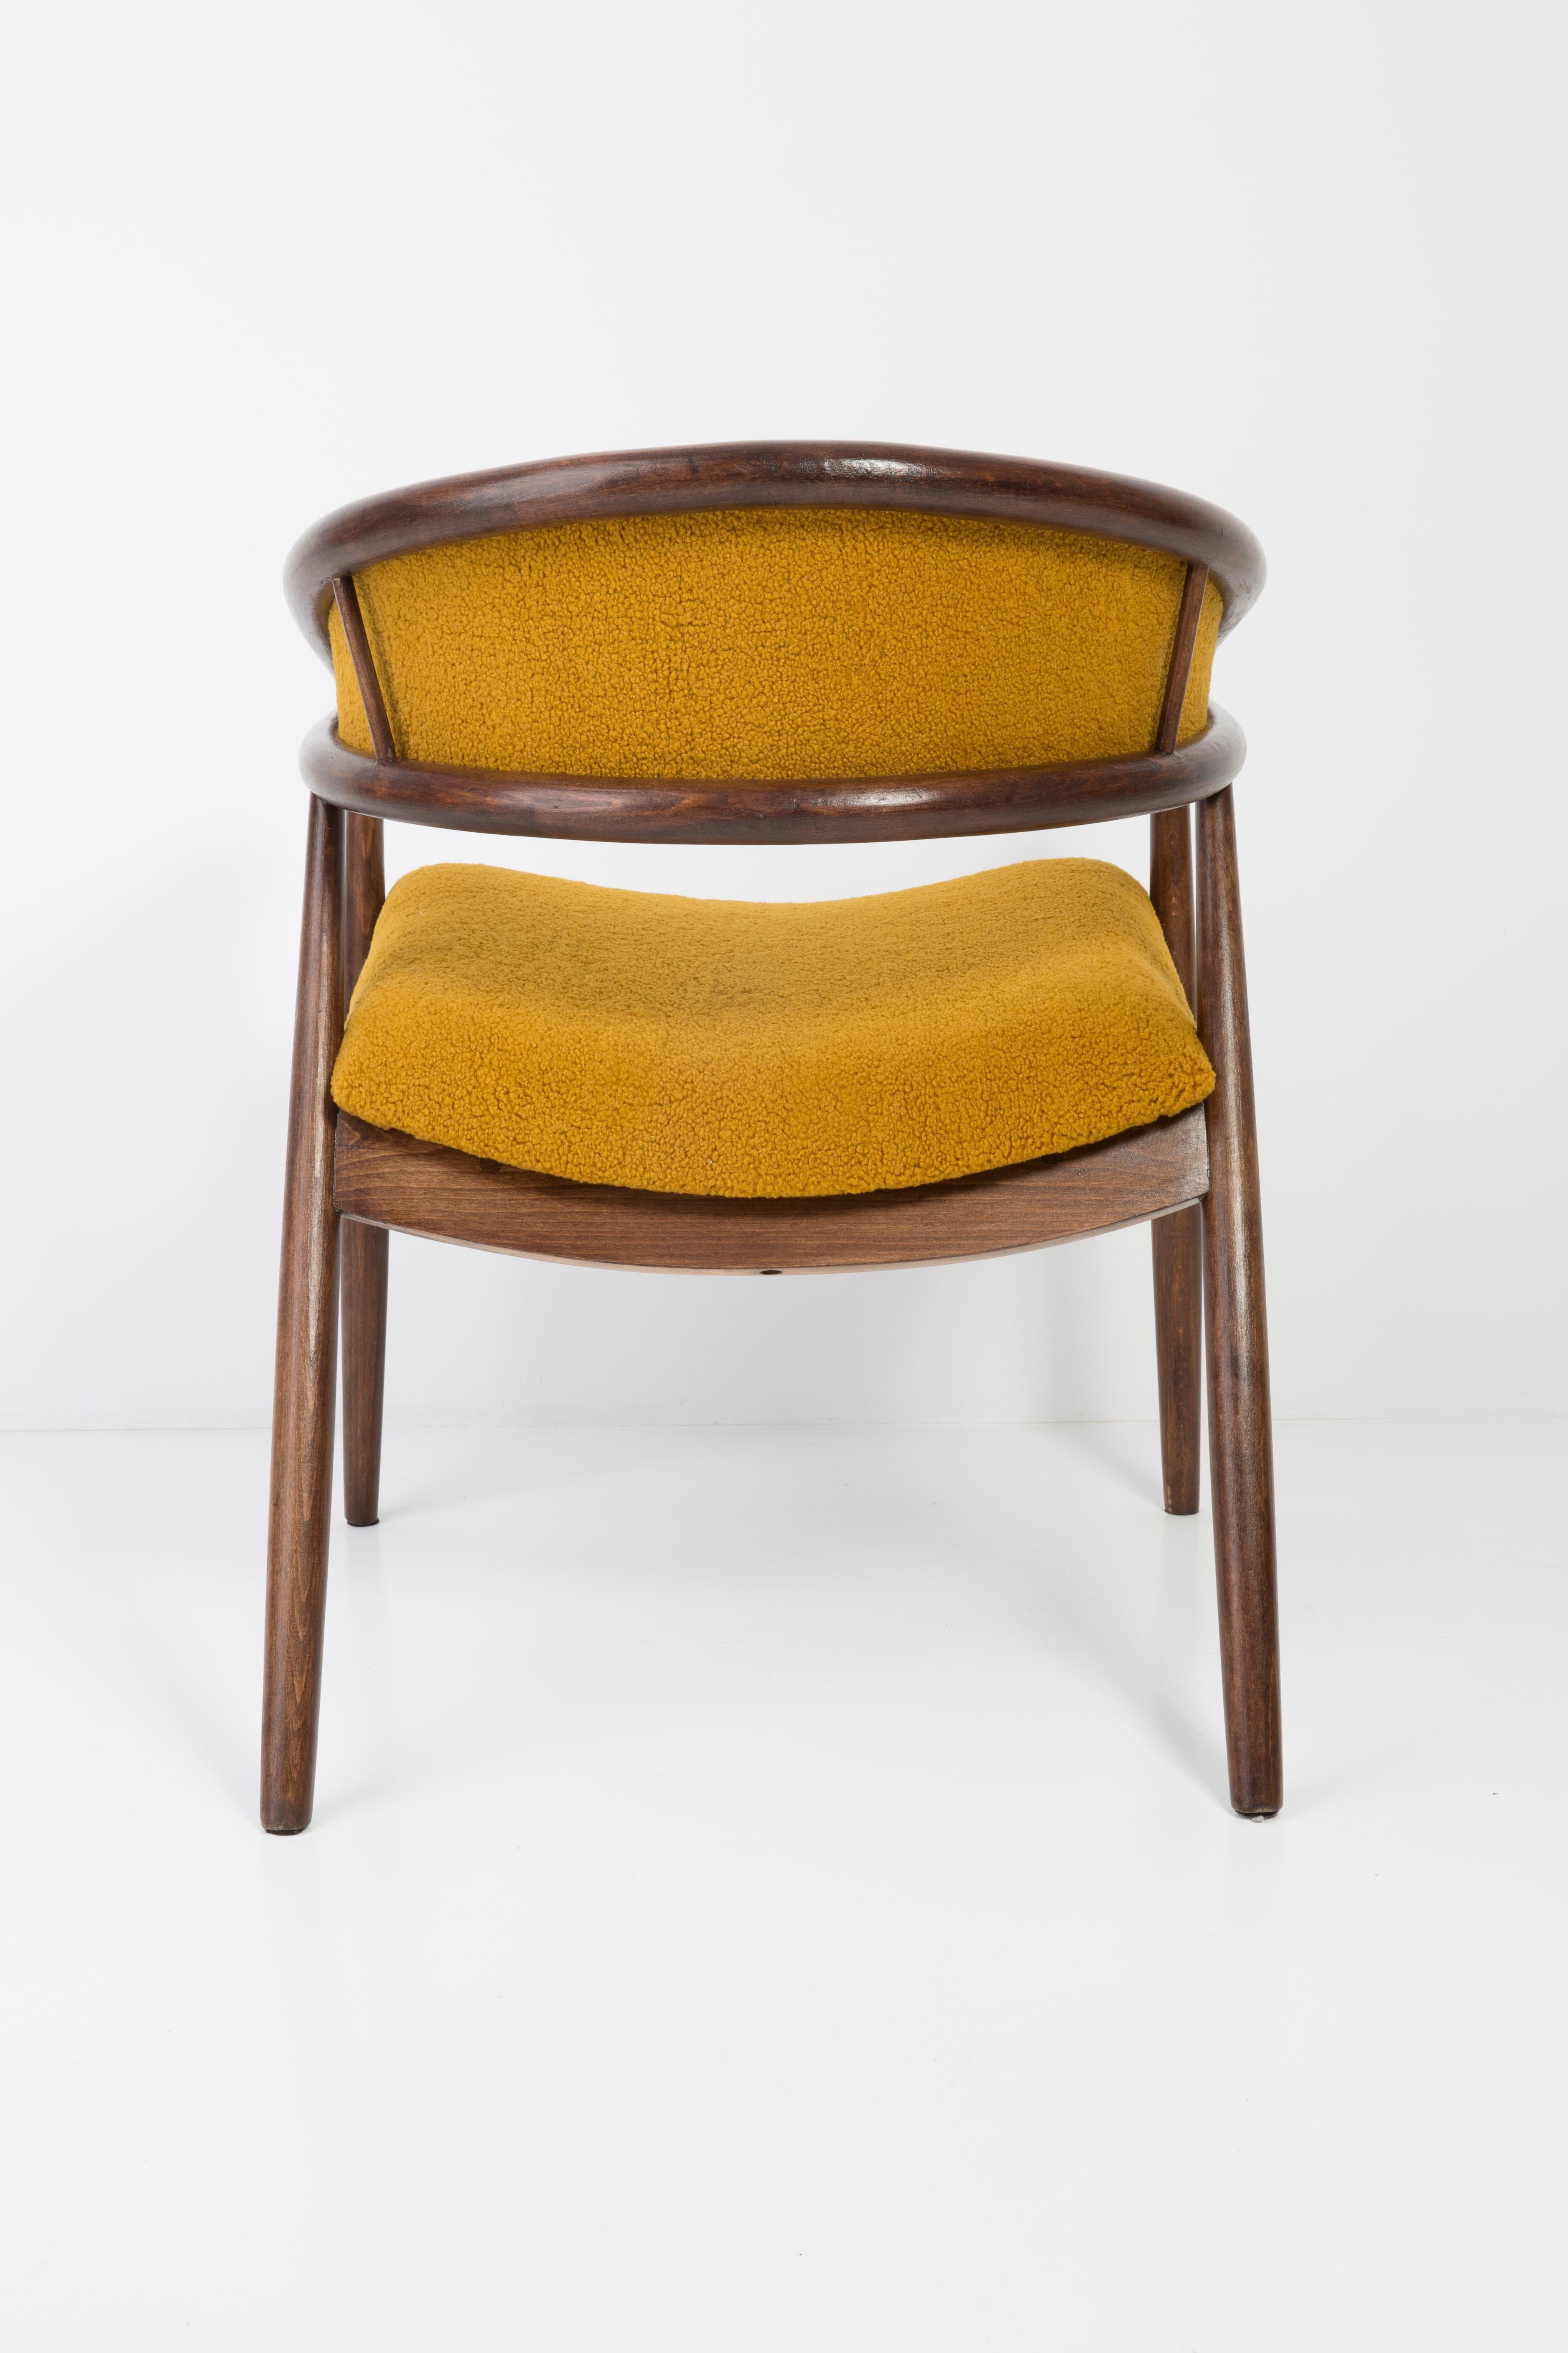 Set of Two James Mont Bent Beech Armchairs, Yellow Ochra Boucle, 1960s For Sale 10